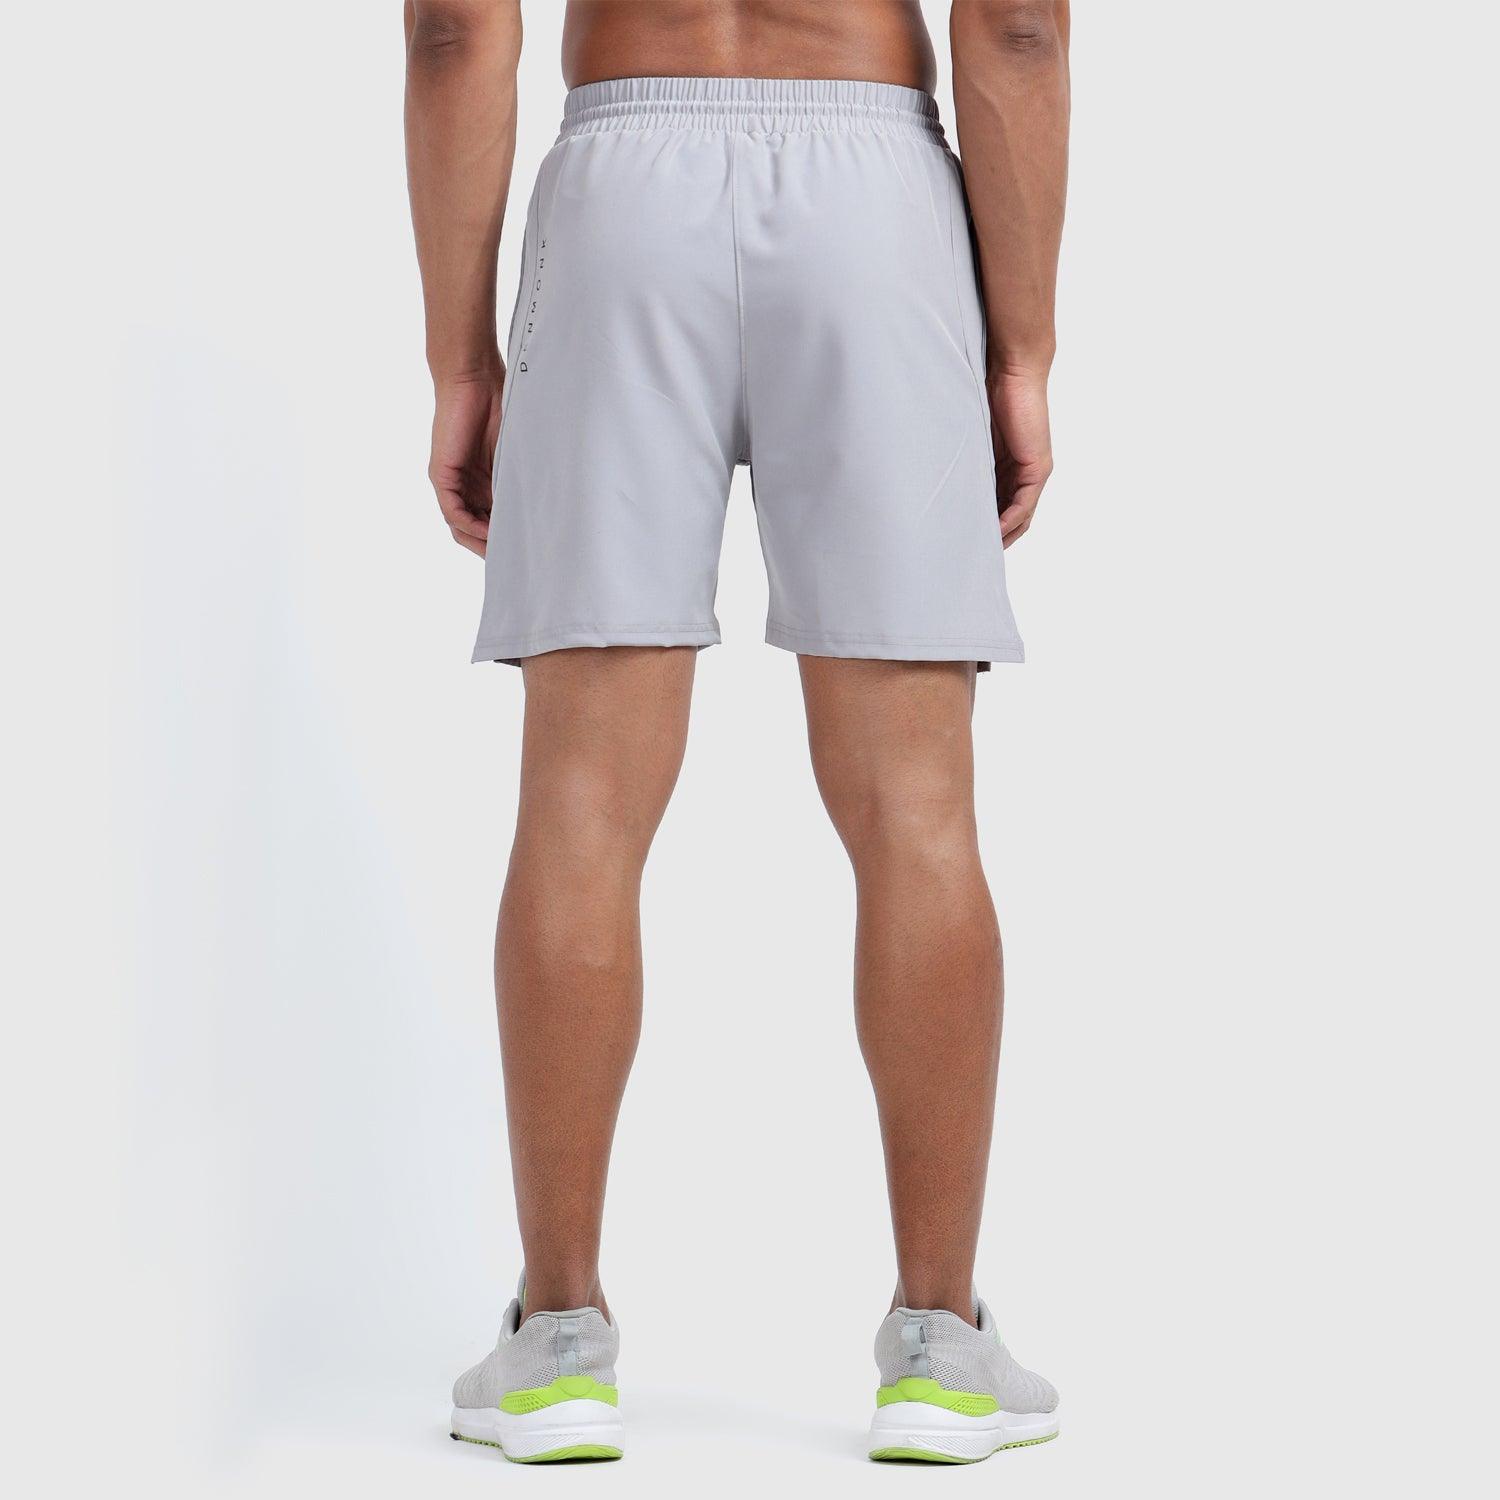 Denmonk's fashionable Coastline Comfort light grey shorts for men will boost your level of gym fitness.